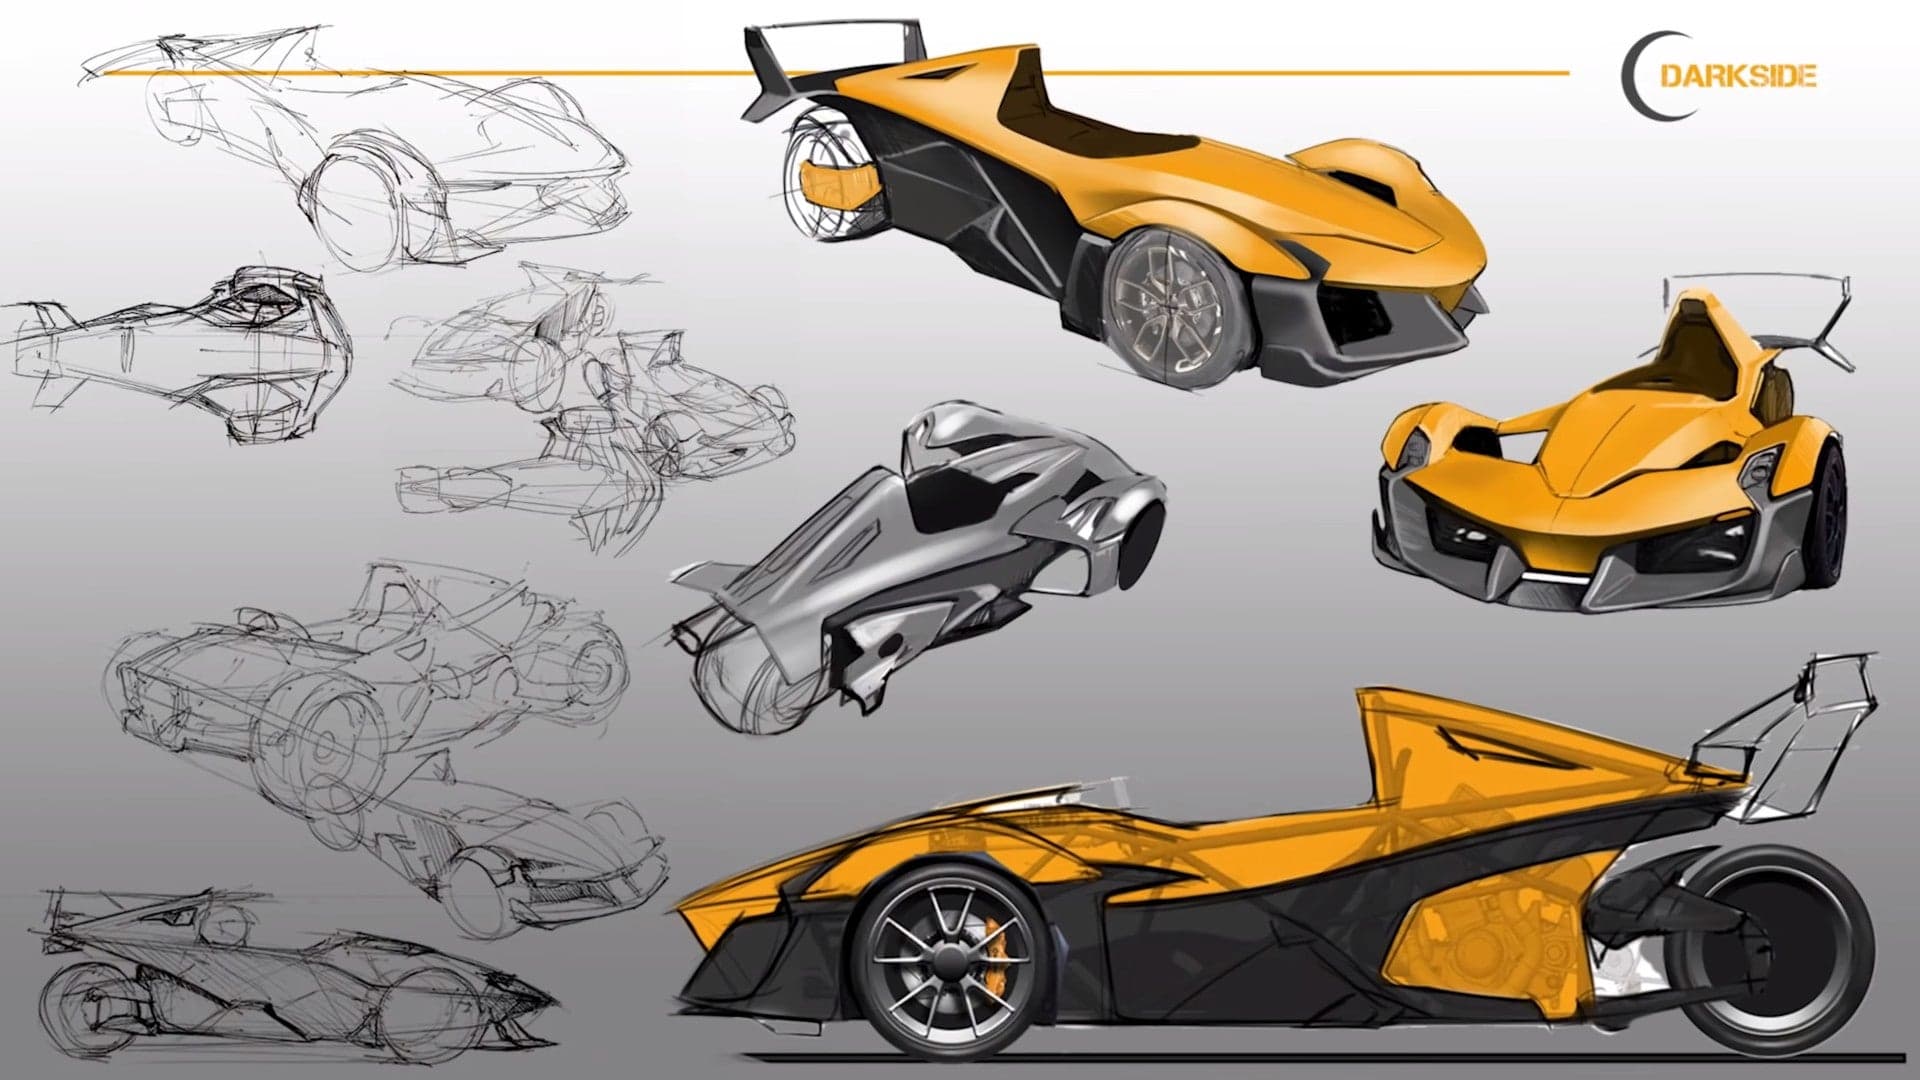 These Are the Design Finalists for the Turbo Hayabusa-Engined Darkside Three-Wheeler